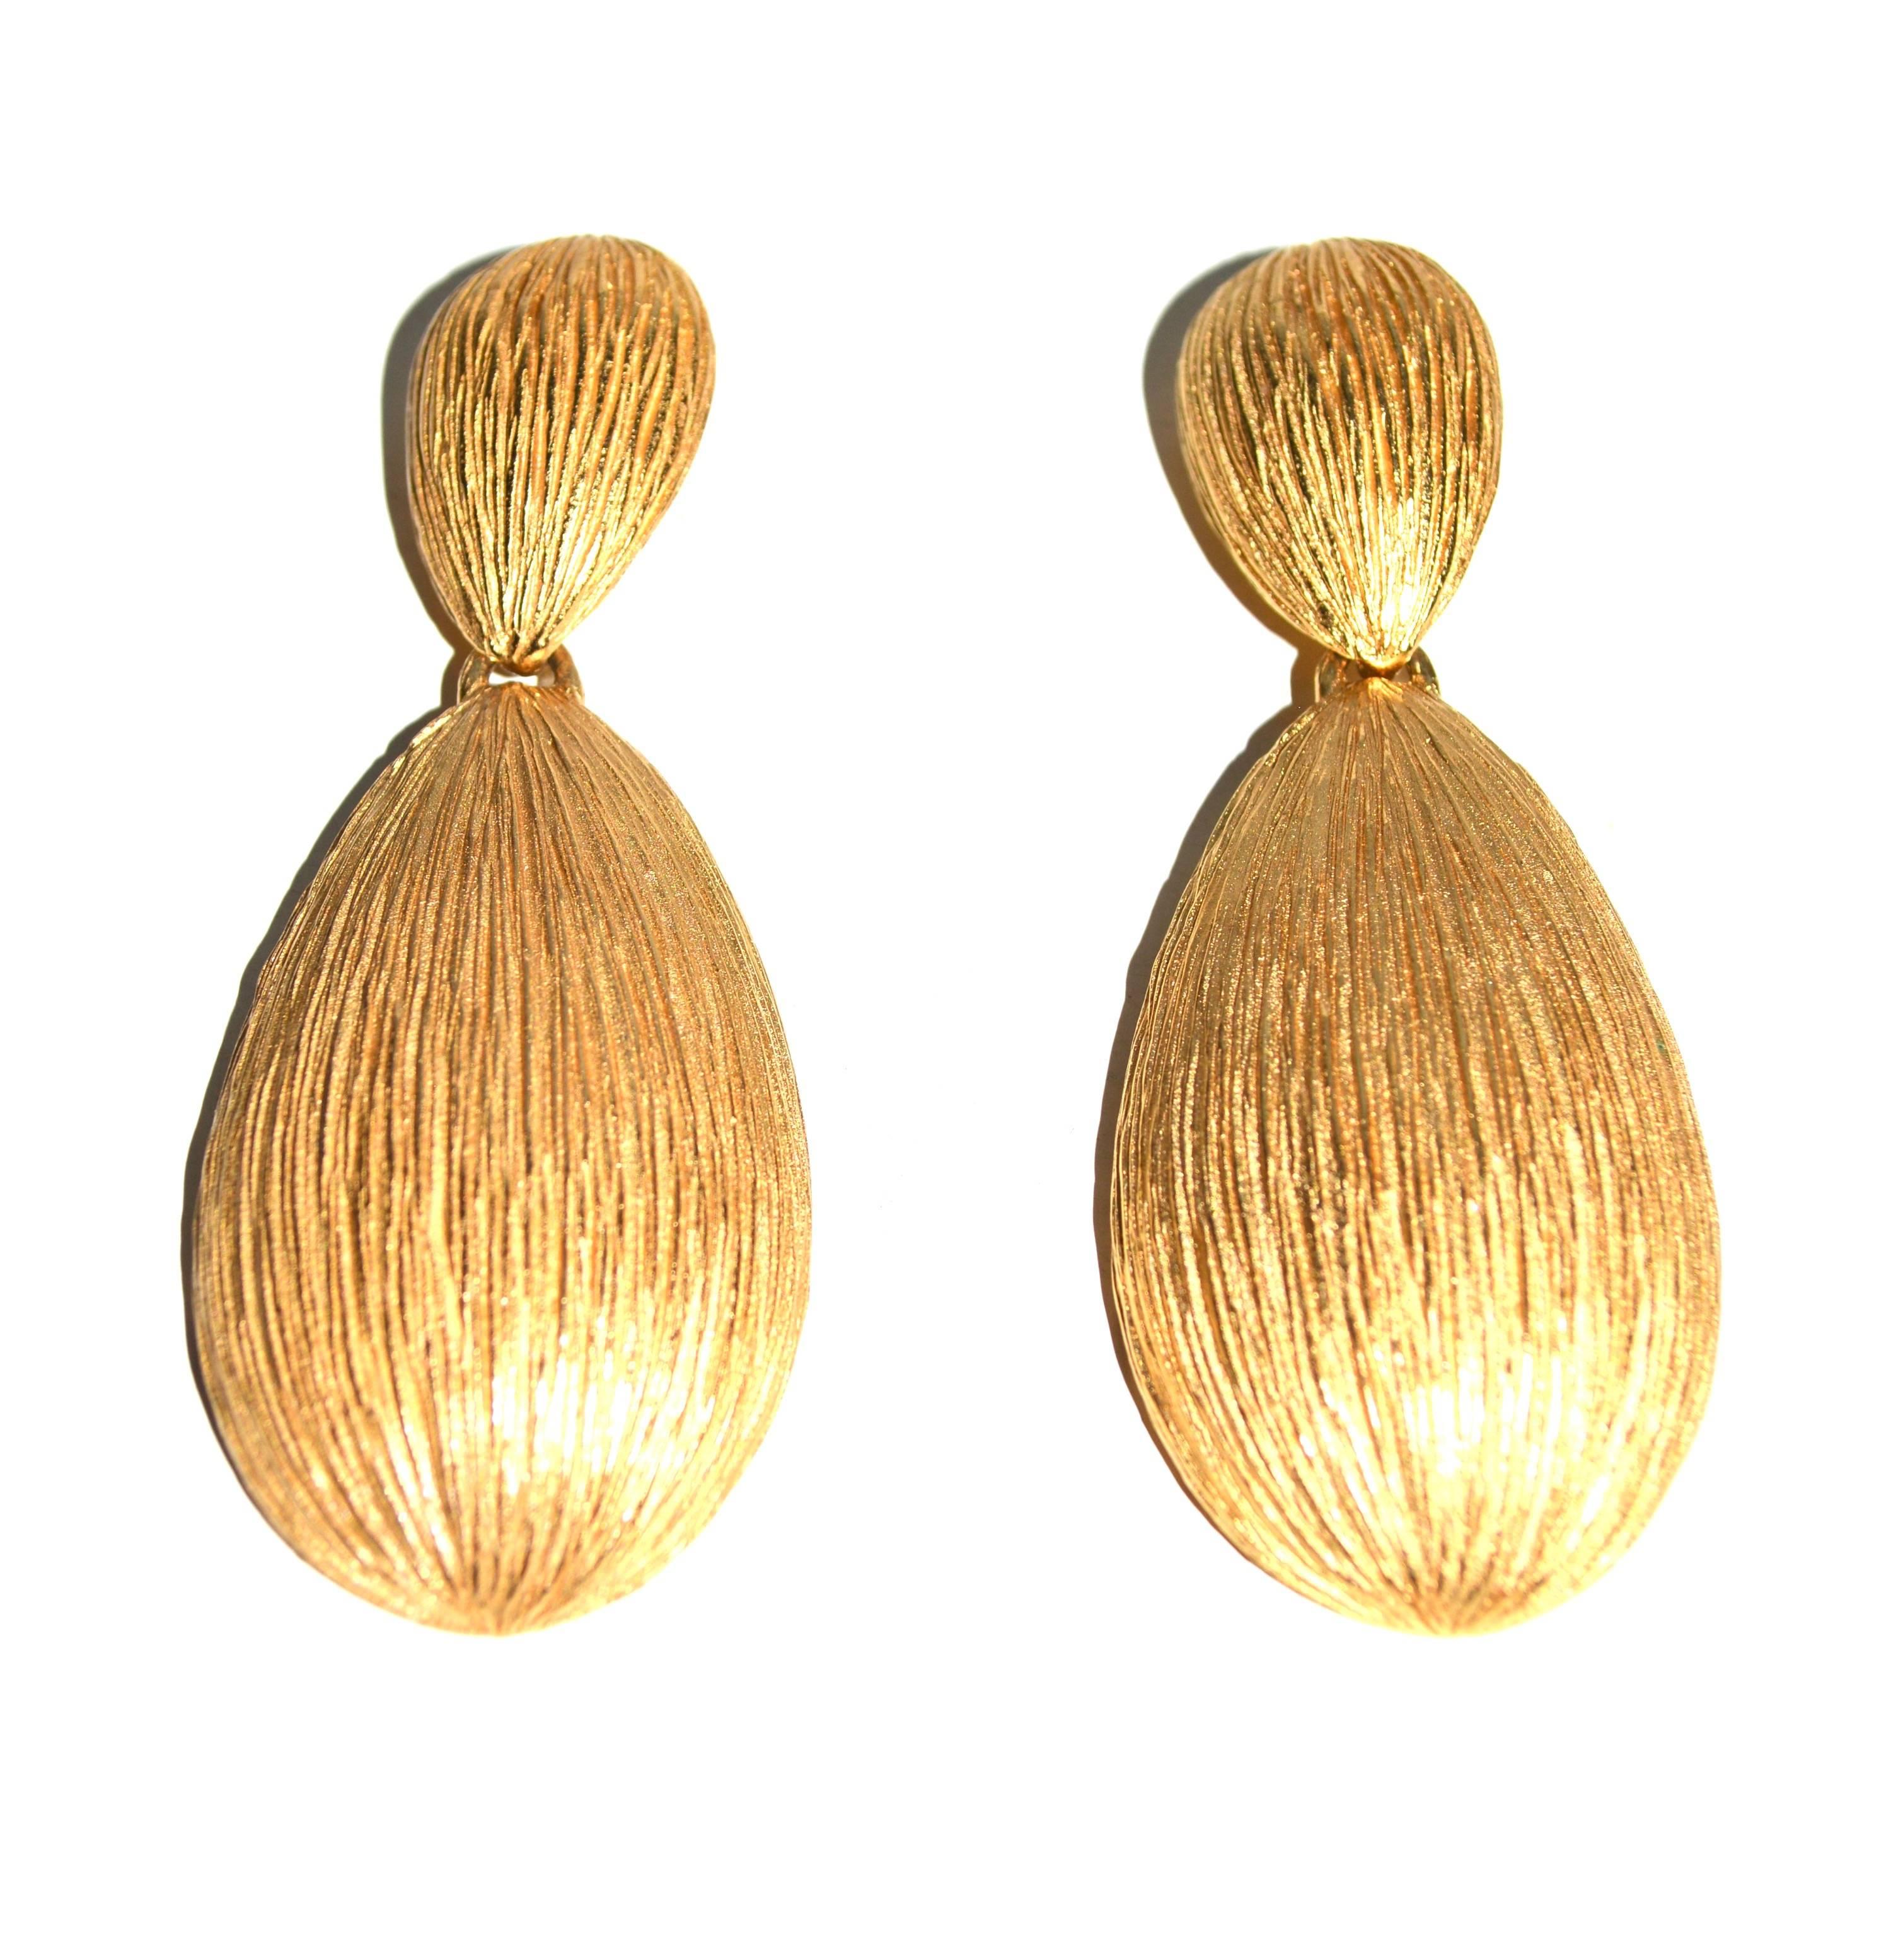 Circa 1980s signed Balenciaga stunning geometric etched metal earrings. From a French collection. The size is 3.5″ long by 1.5″ wide at the largest point. Width varies. Condition and gilt is excellent. 